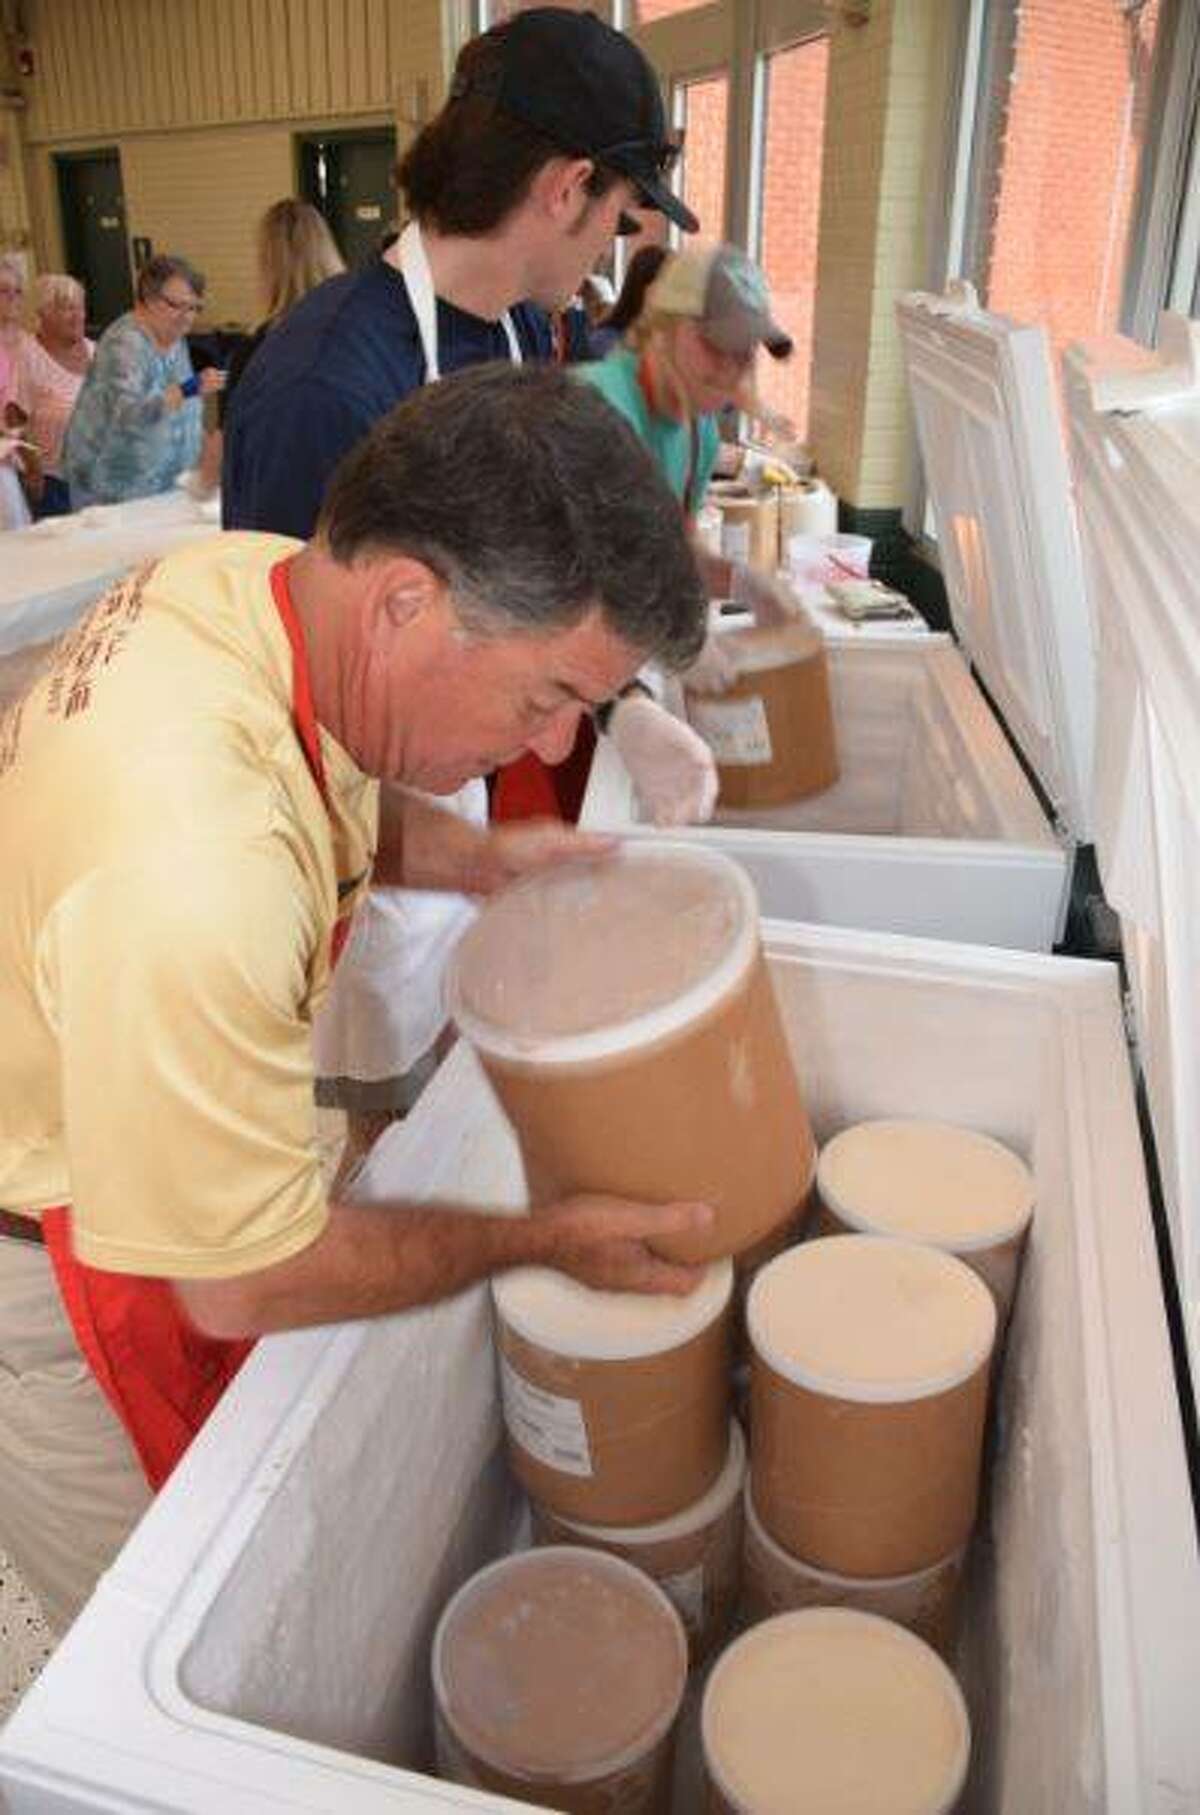 Volunteers pull more ice cream from the freezer to serve Wood River Ice Cream Social visitors on Sunday.